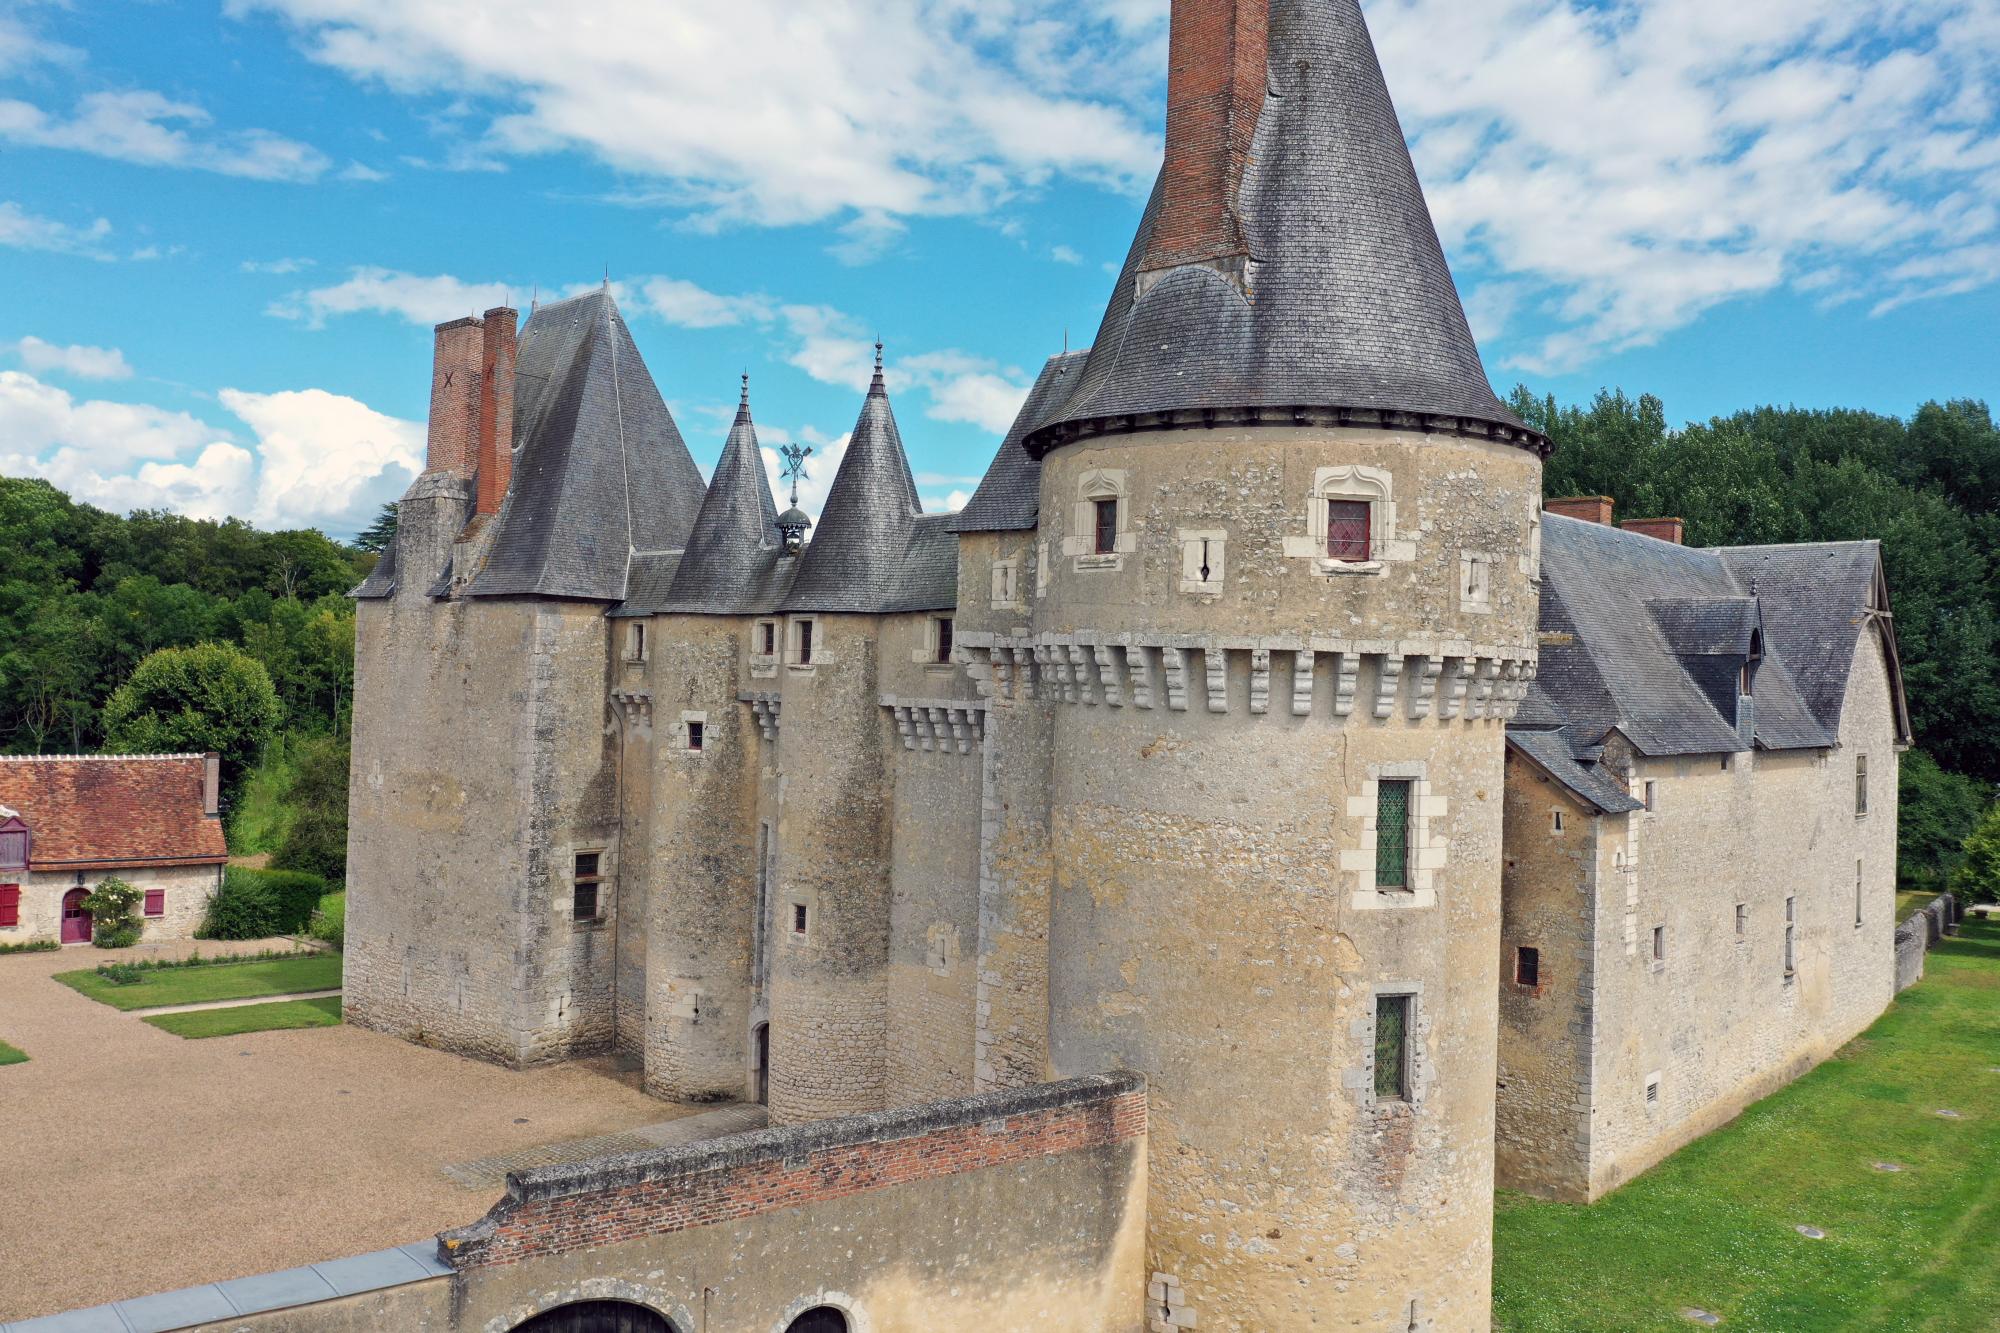 Discover The Valley of Loire - Vacation package : France Coast to Coast  - Land of France, travel agency in France